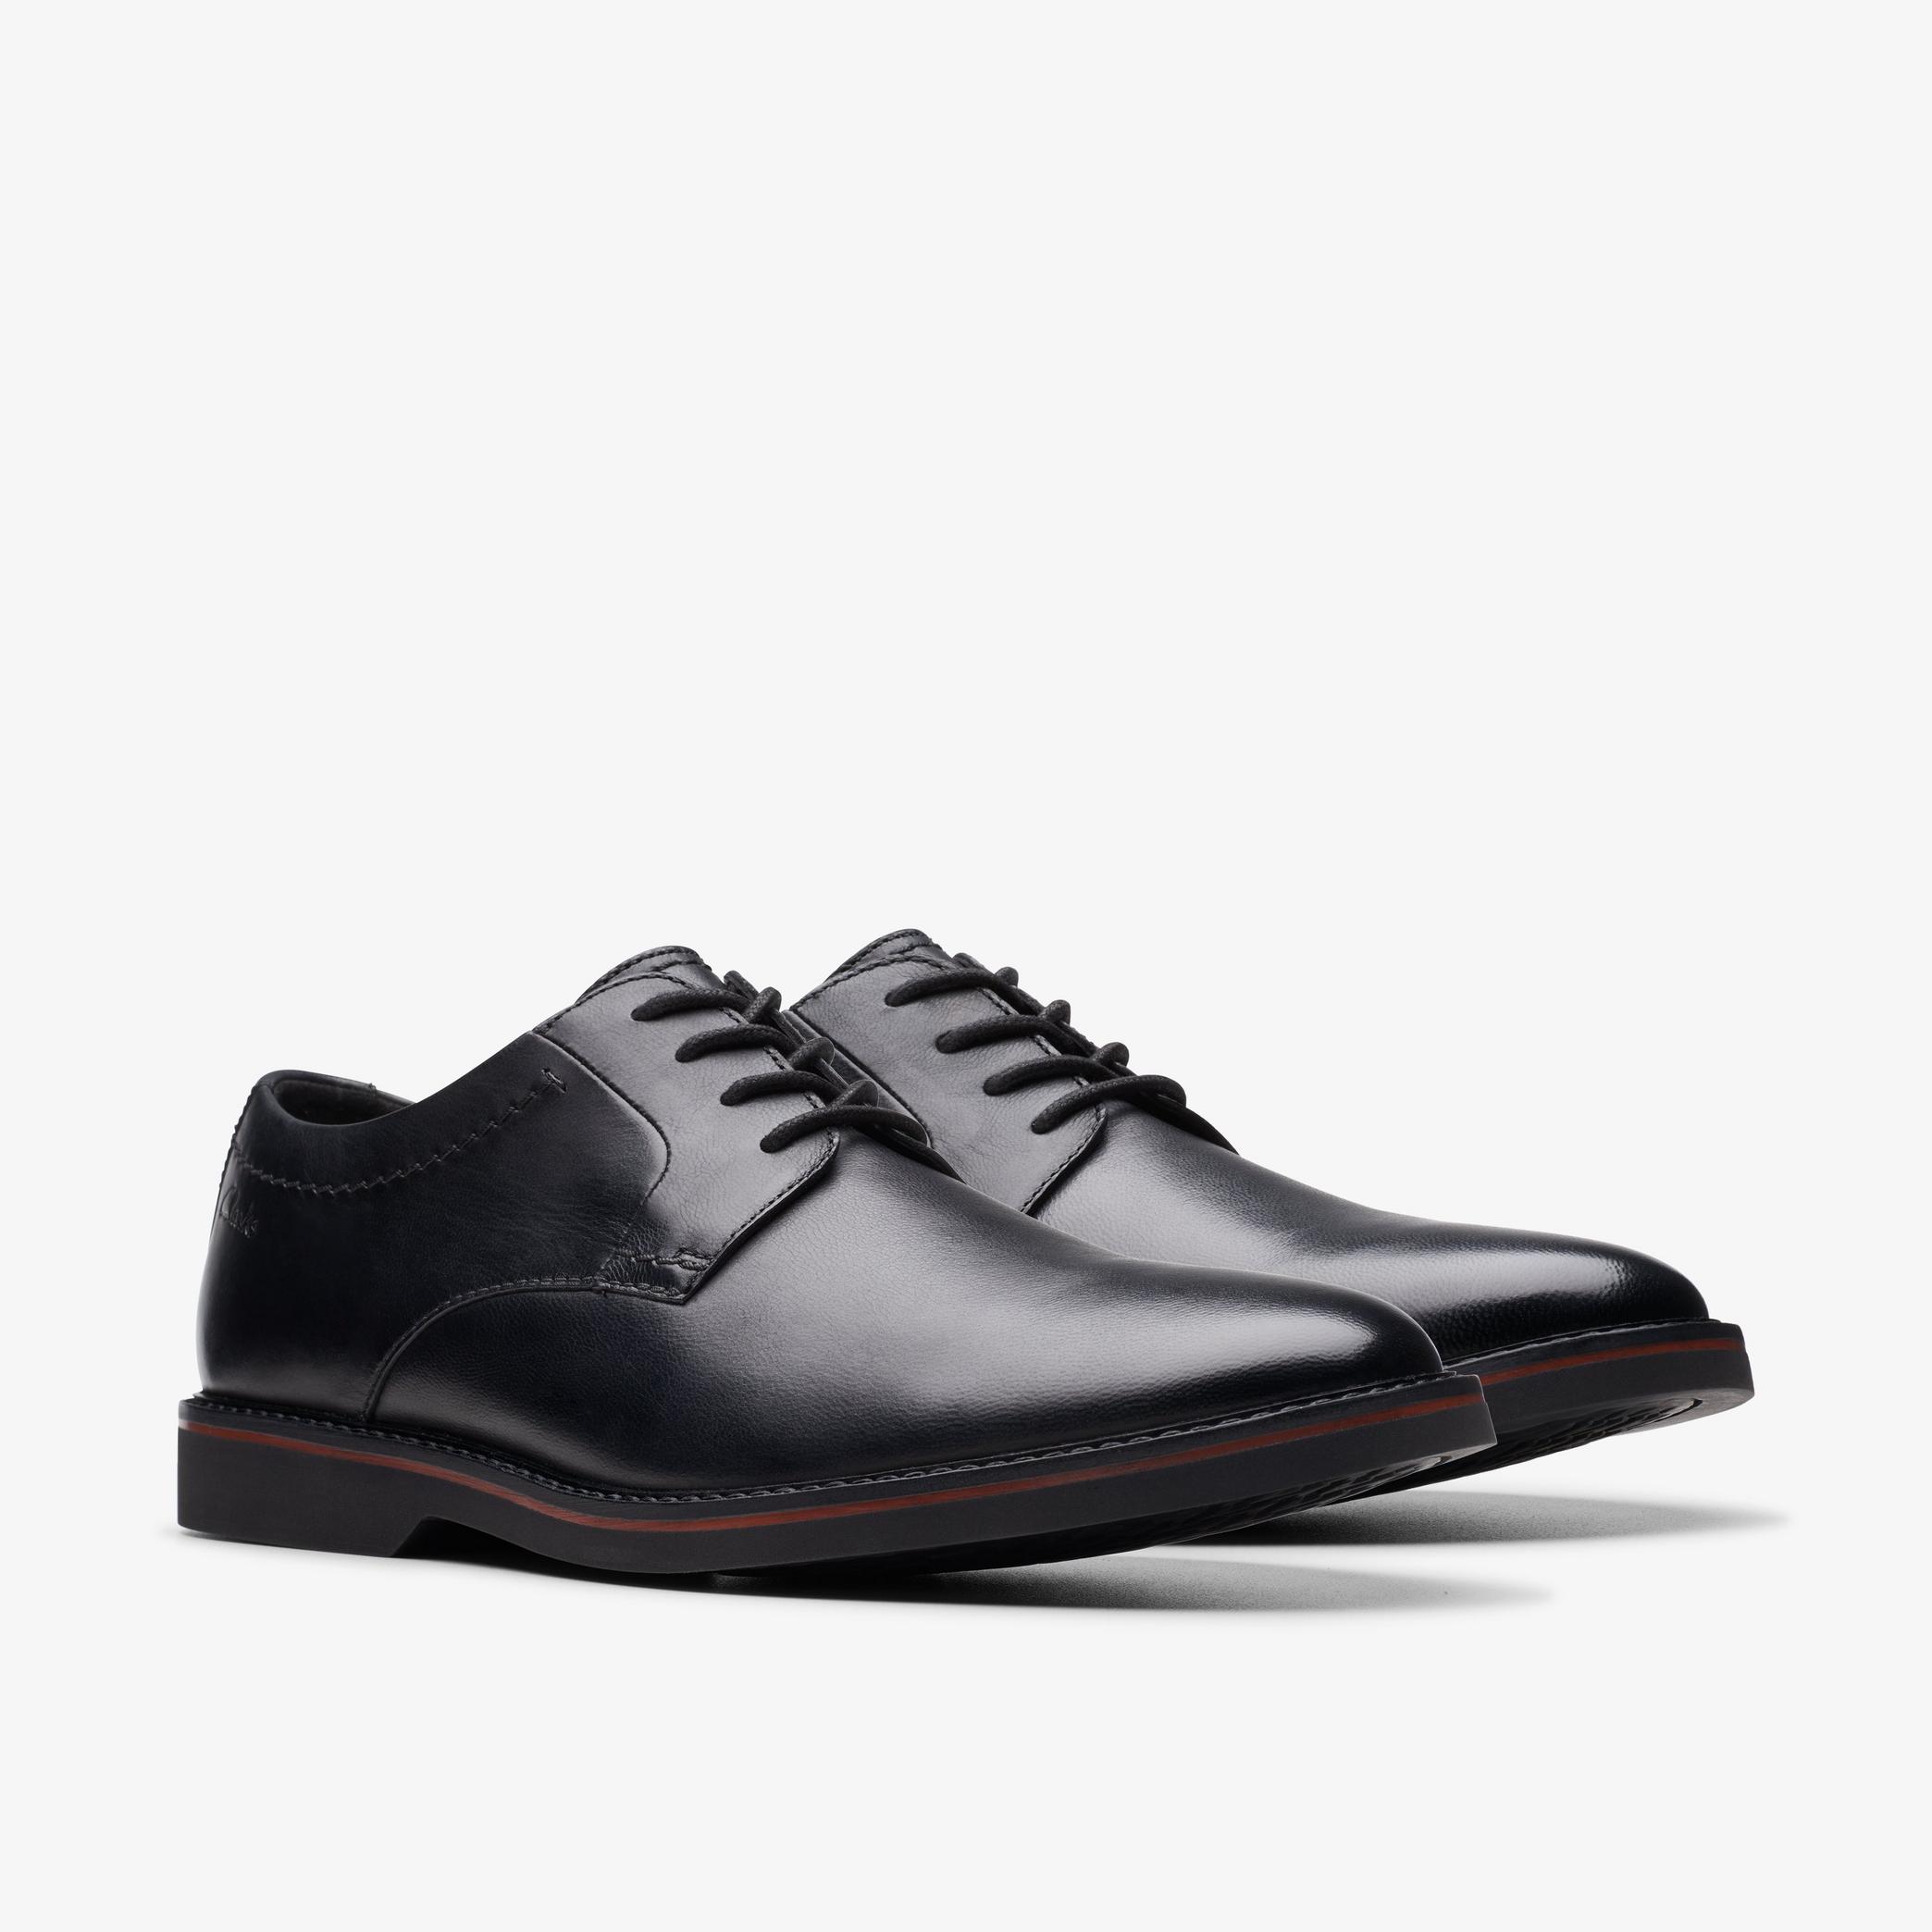 Atticus Lace Black Oxford Shoes, view 5 of 7